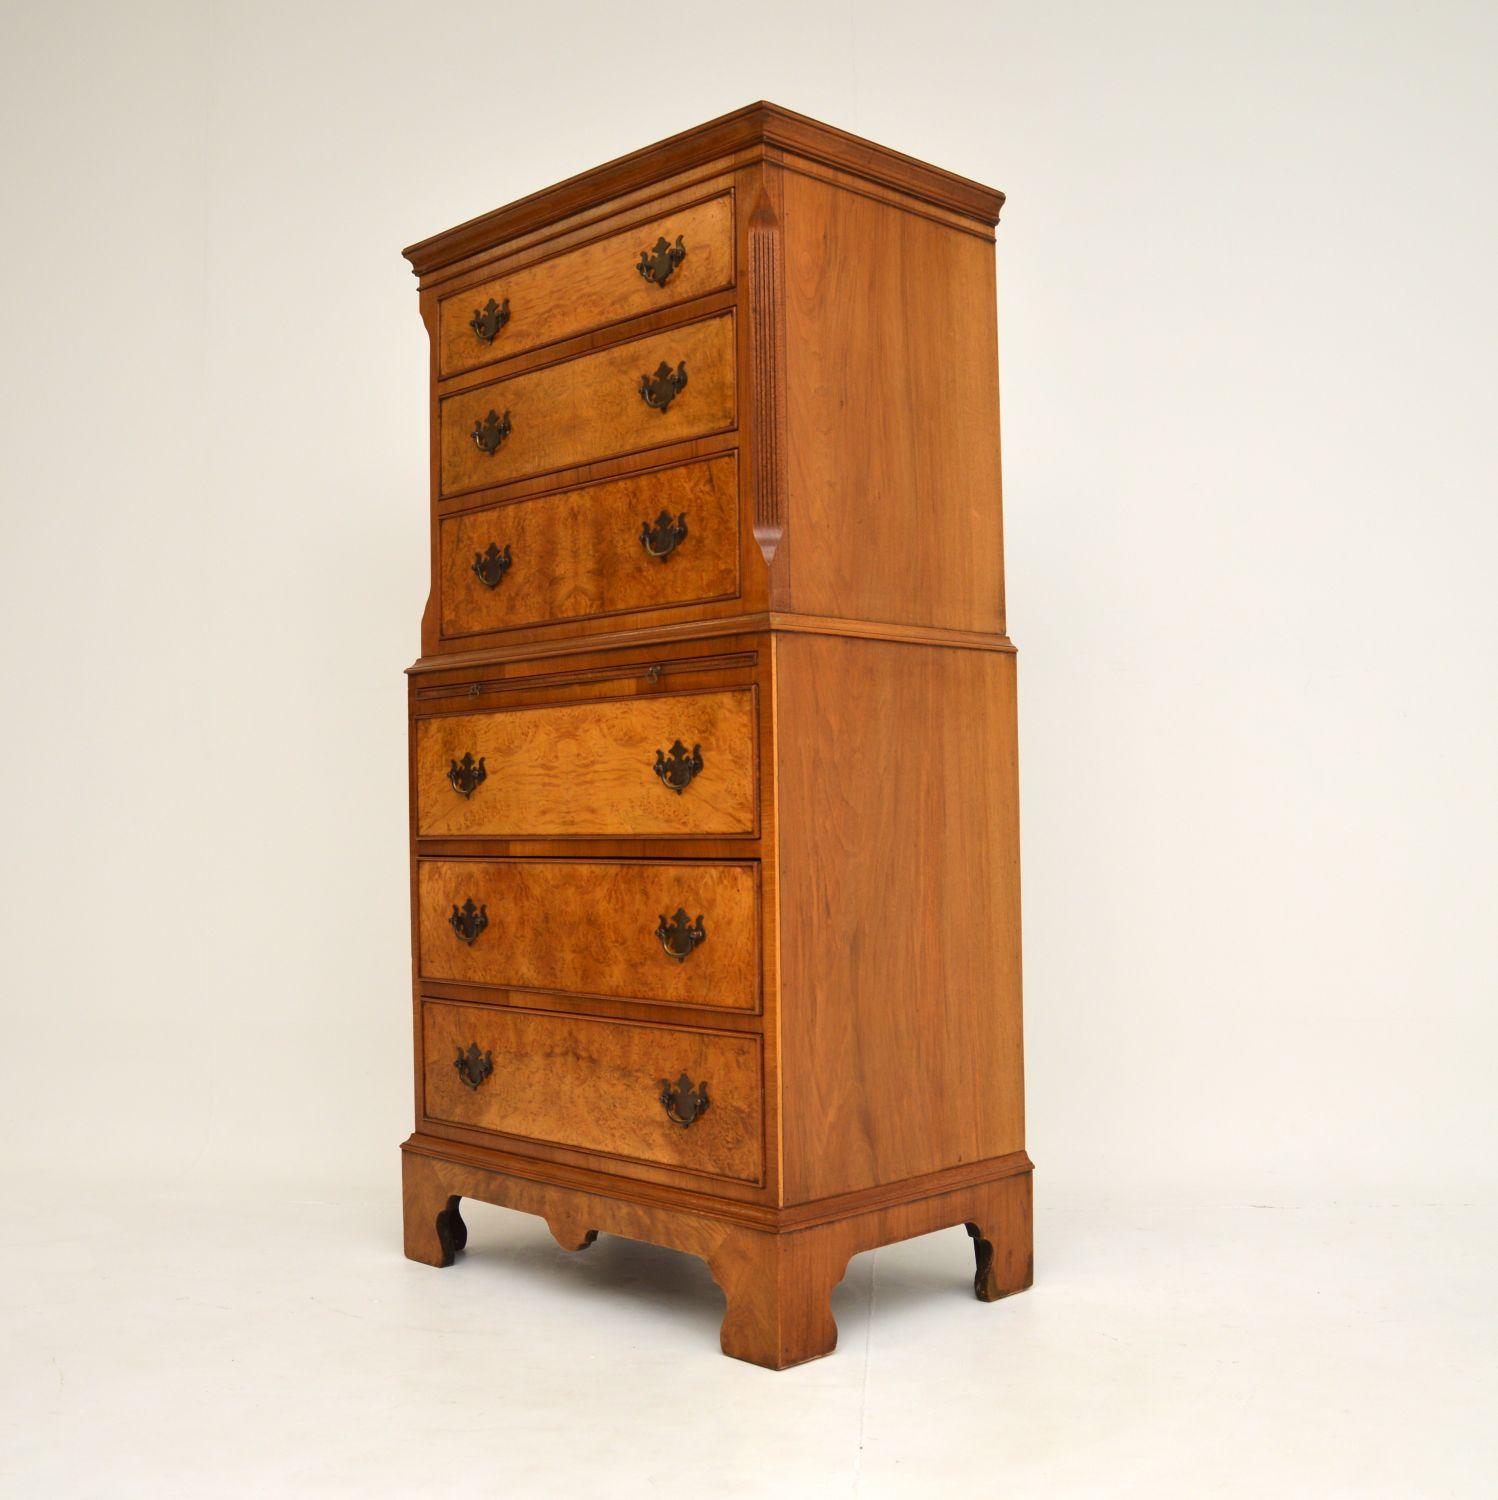 English Antique Burr Walnut Chest on Chest of Drawers